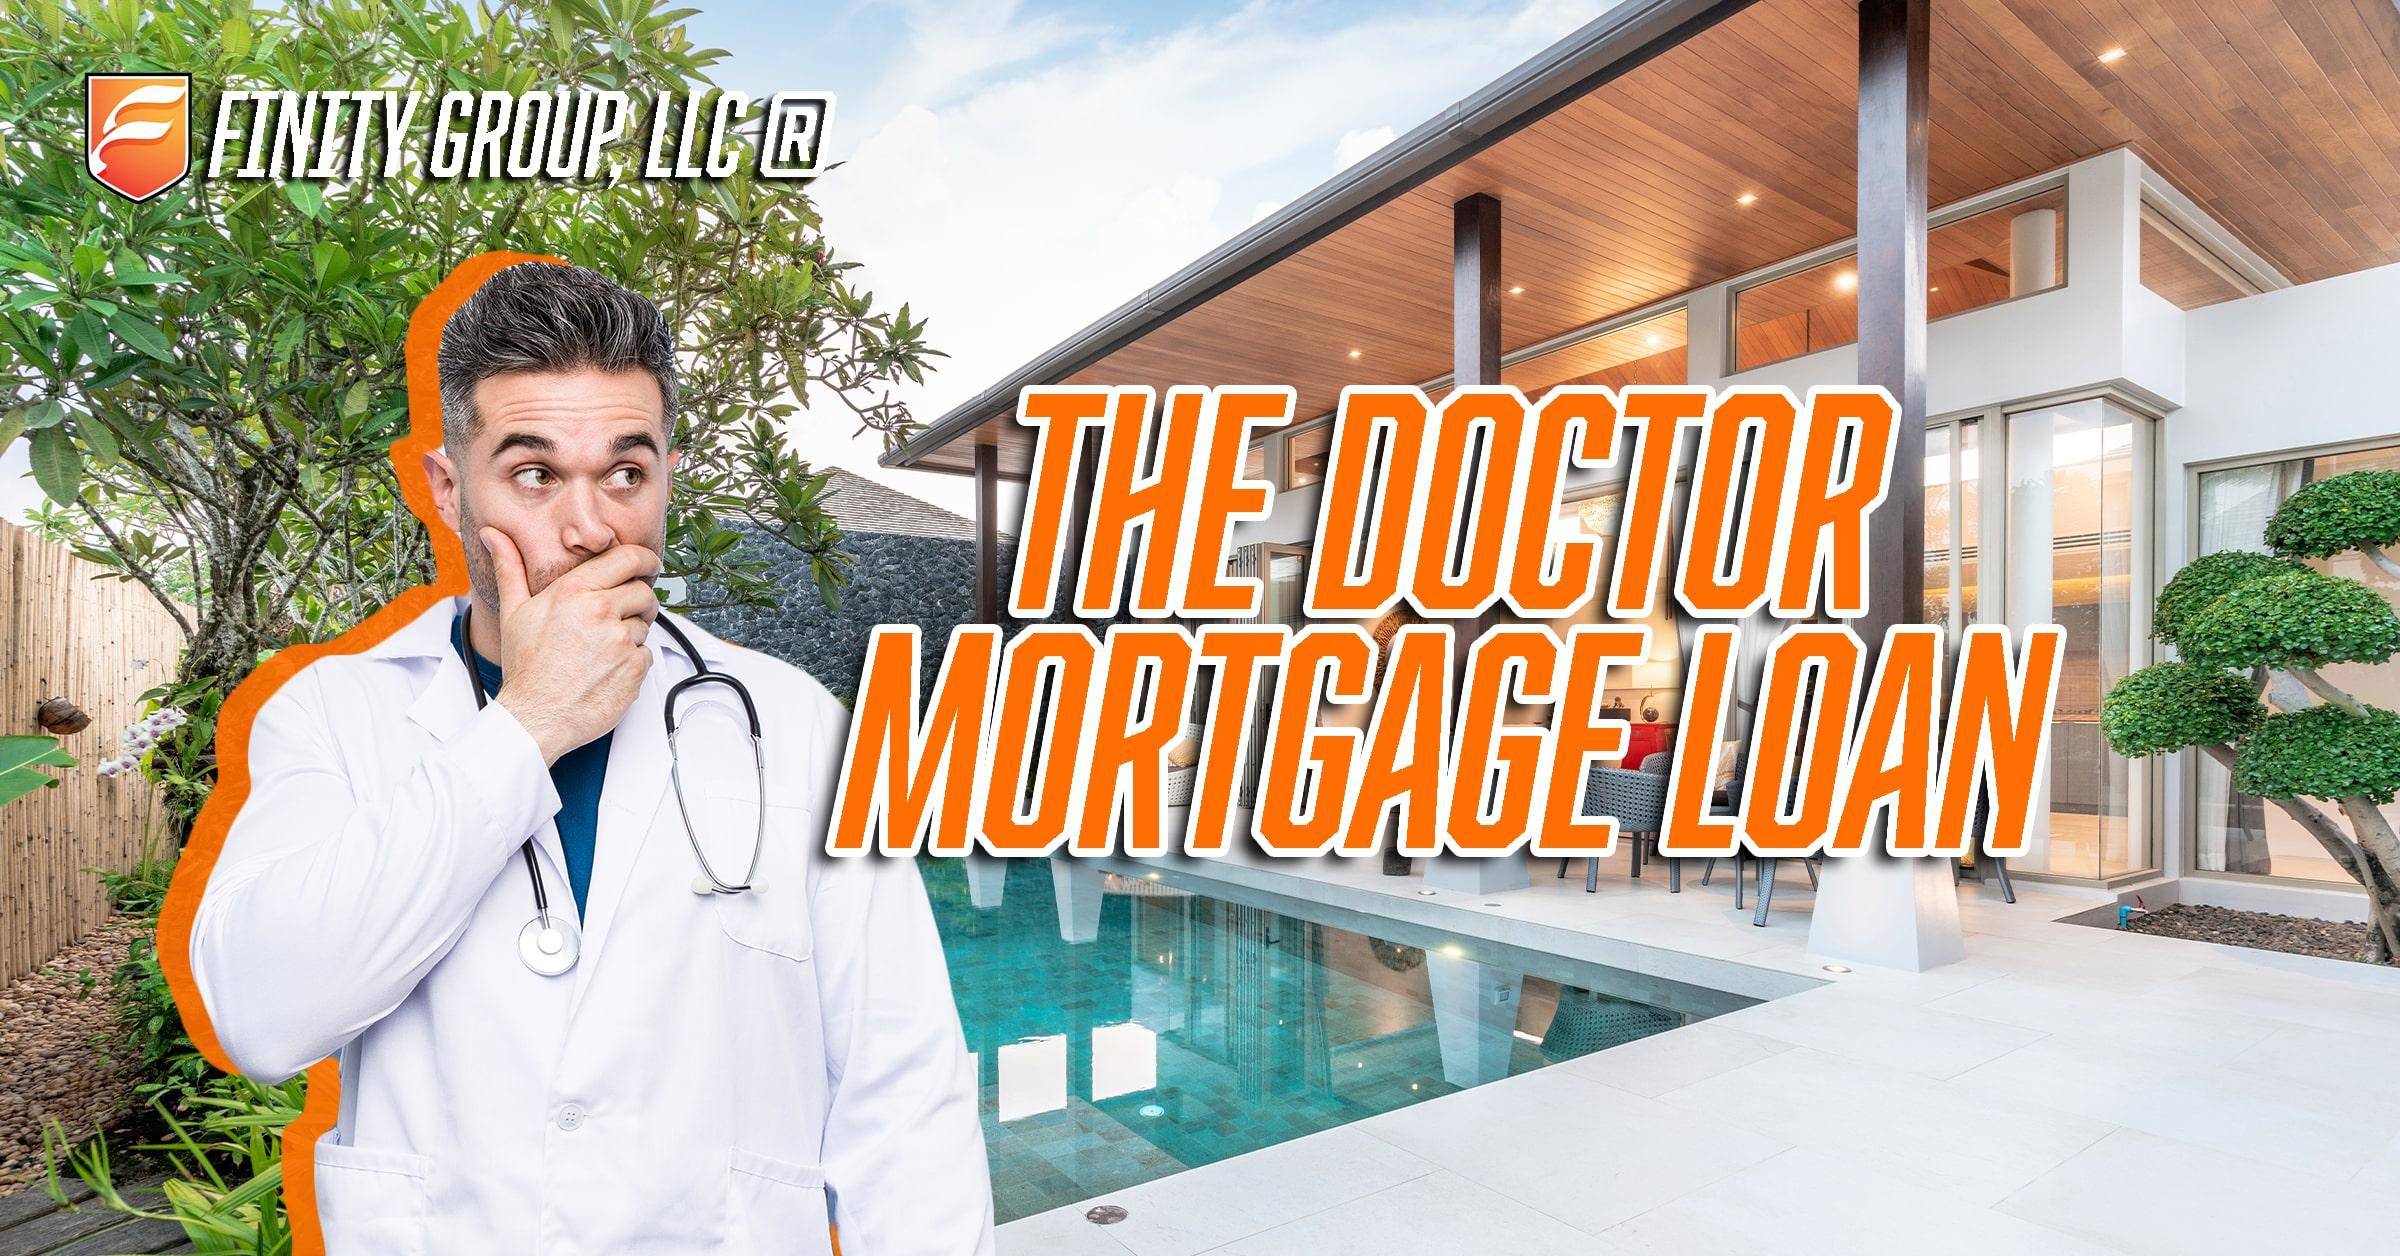 Compare leading physician mortgages-Doctor Loan Programs